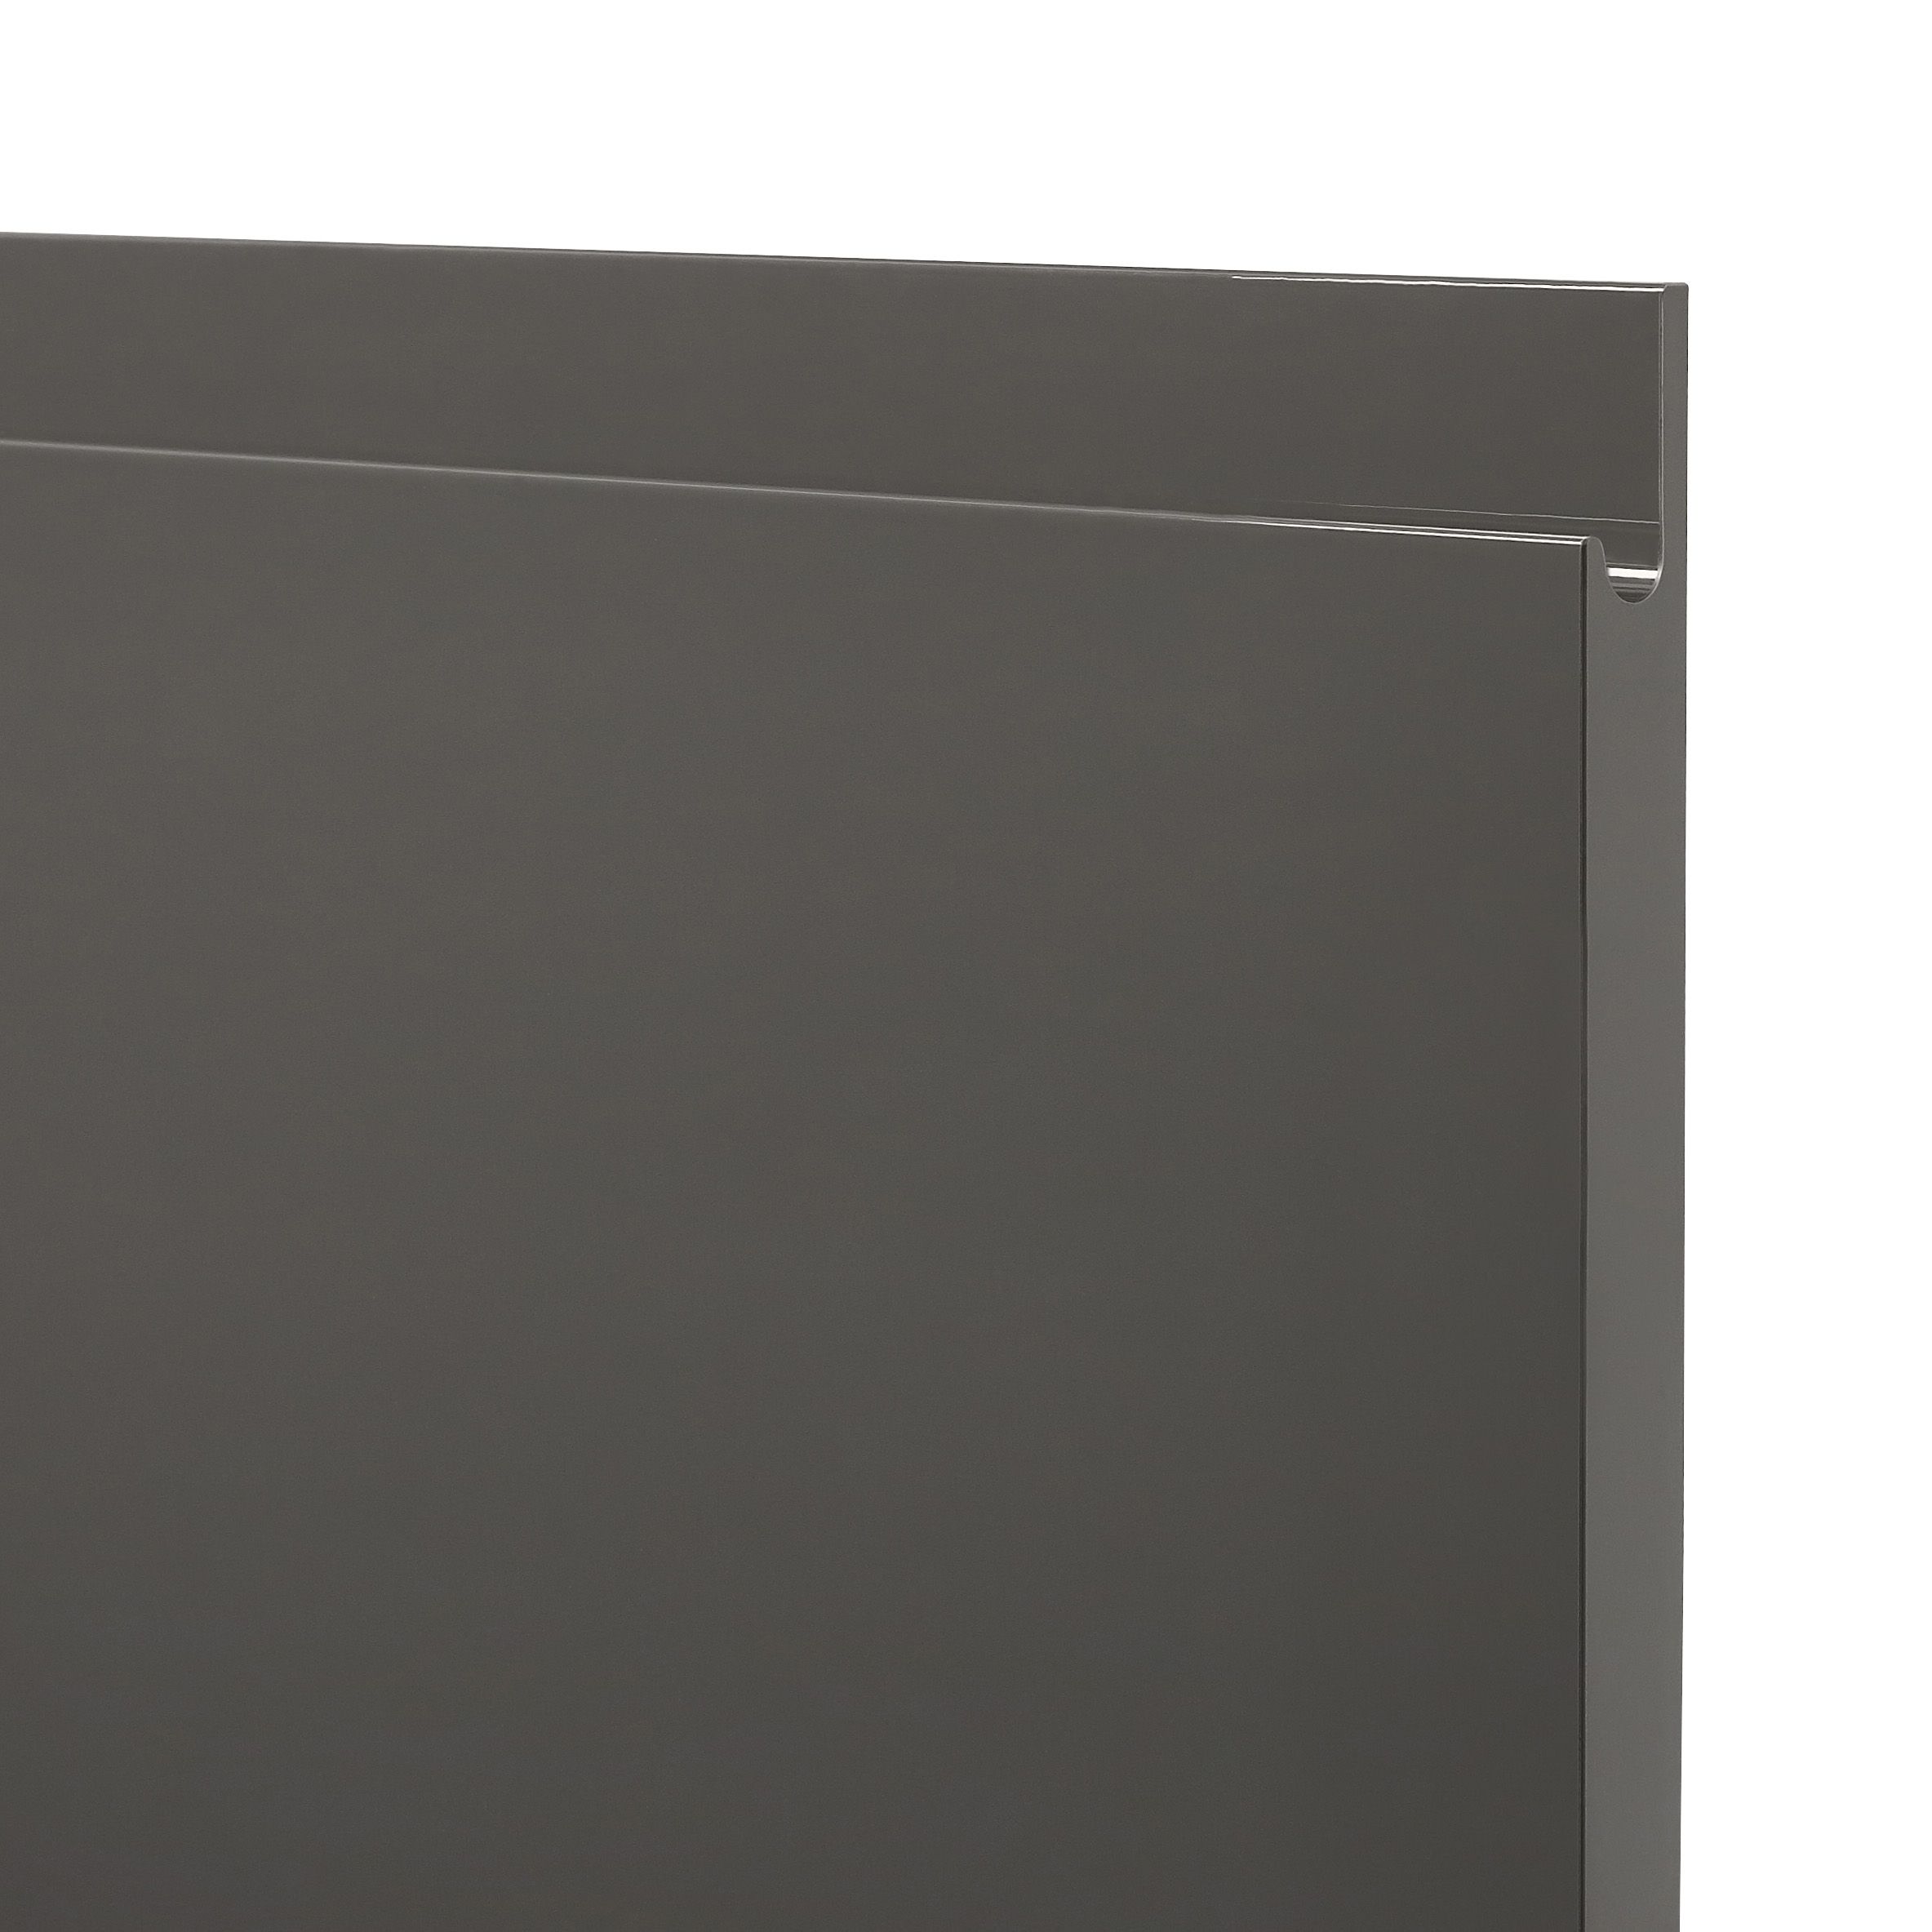 GoodHome Garcinia Gloss anthracite integrated handle Tall wall Cabinet door (W)250mm (H)895mm (T)19mm